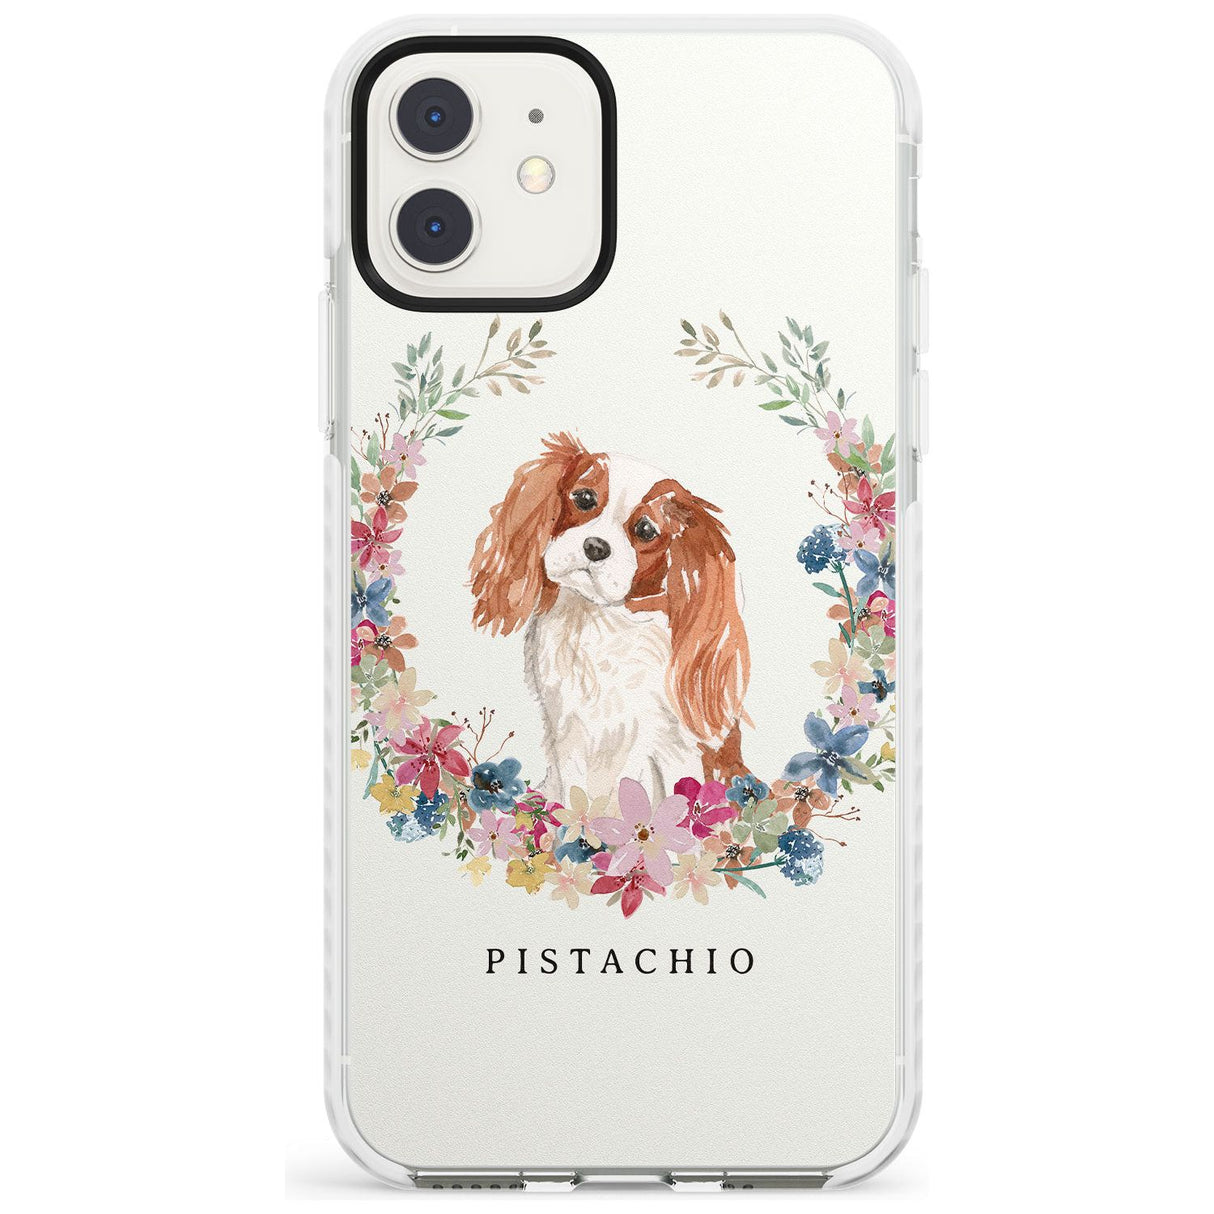 Cavalier King Charles Portrait Spaniel Impact Phone Case for iPhone 11